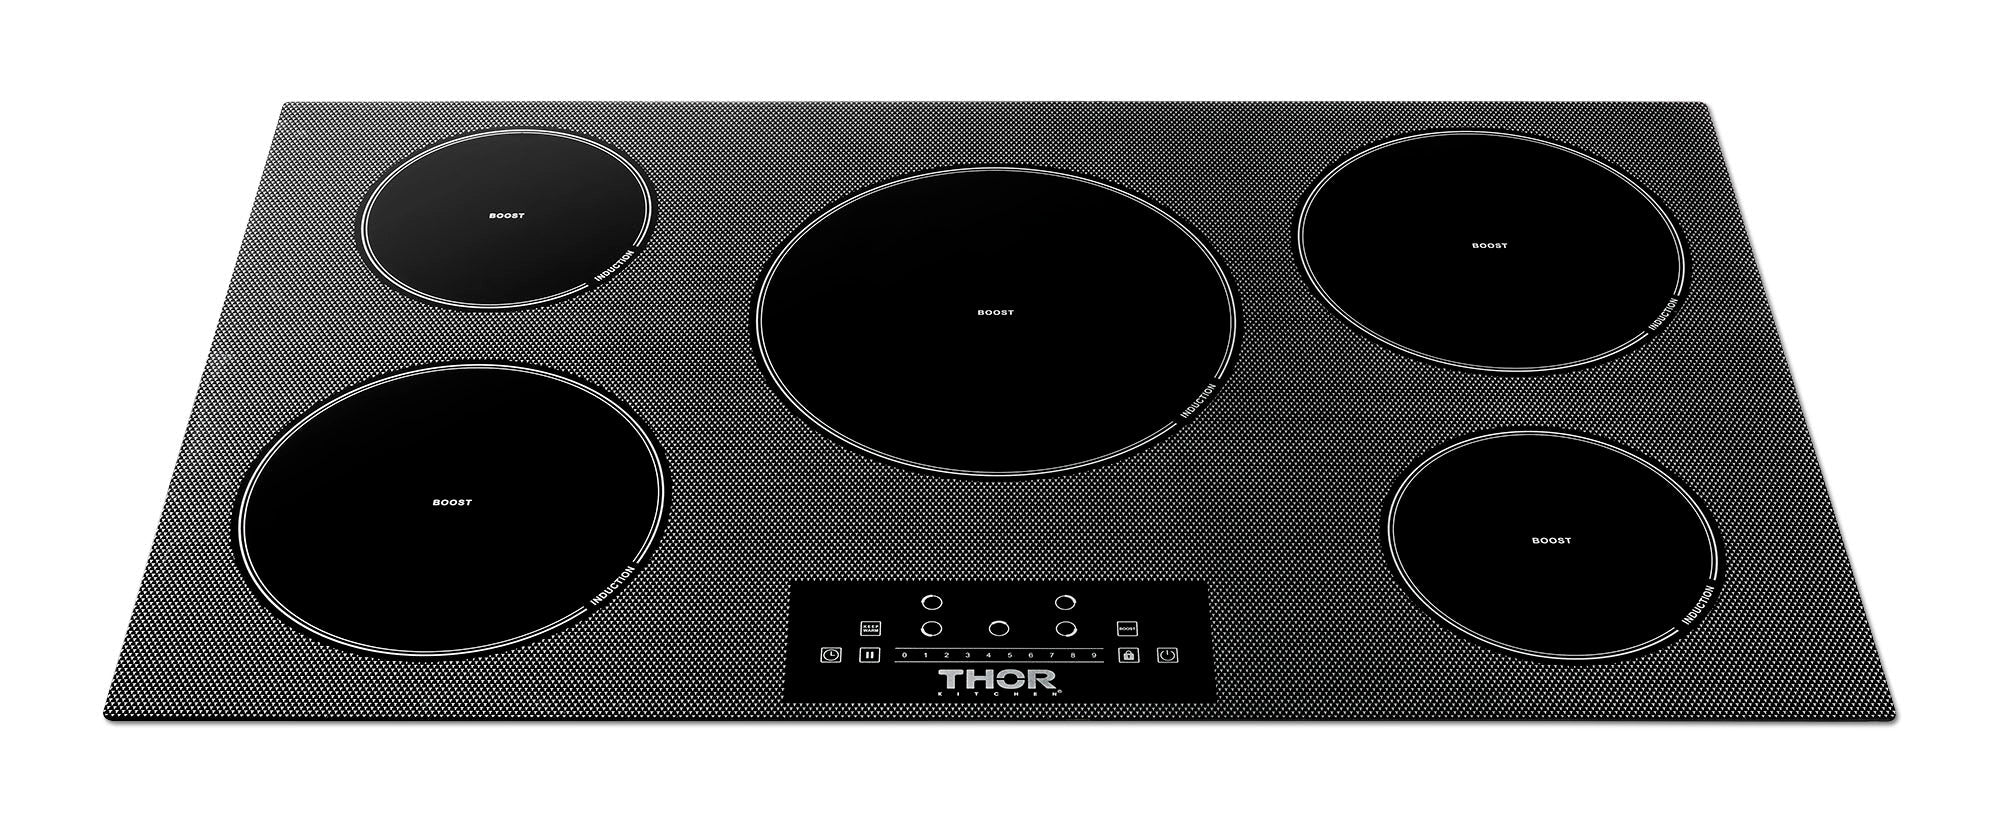 Thor Kitchen 36 Inch Built-In Induction Cooktop with 5 Elements -Model TIH36